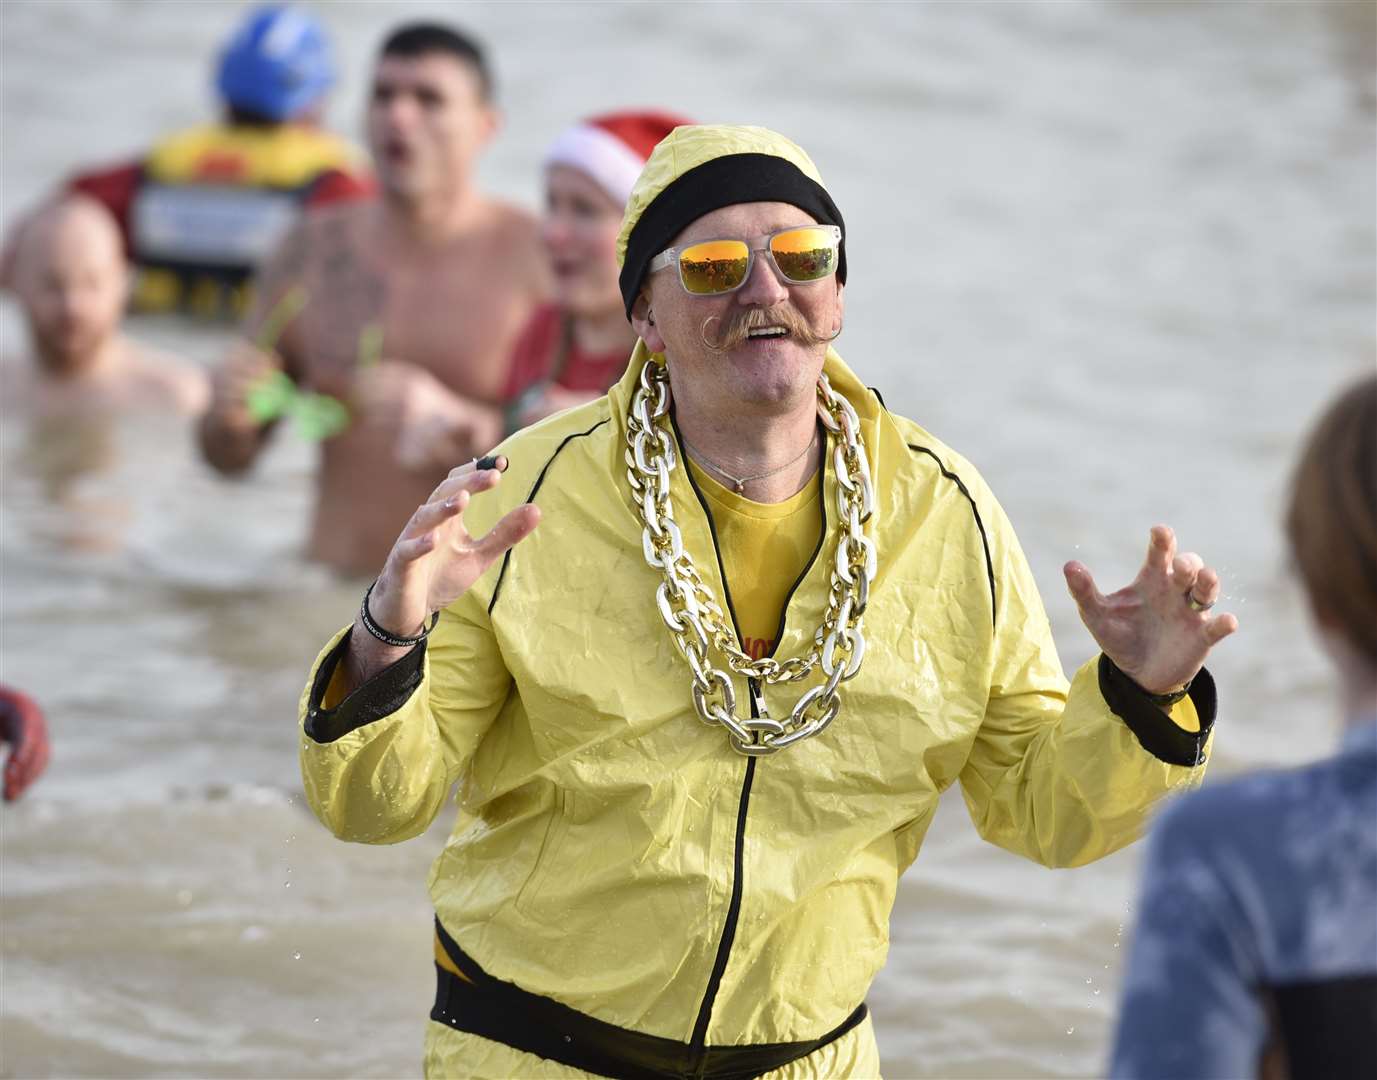 It’s goooooold – or should that be cold. Goldmember from Austin Powers braves the freezing water in Deal. Picture: Carol Fenton/The Unofficial Photographer